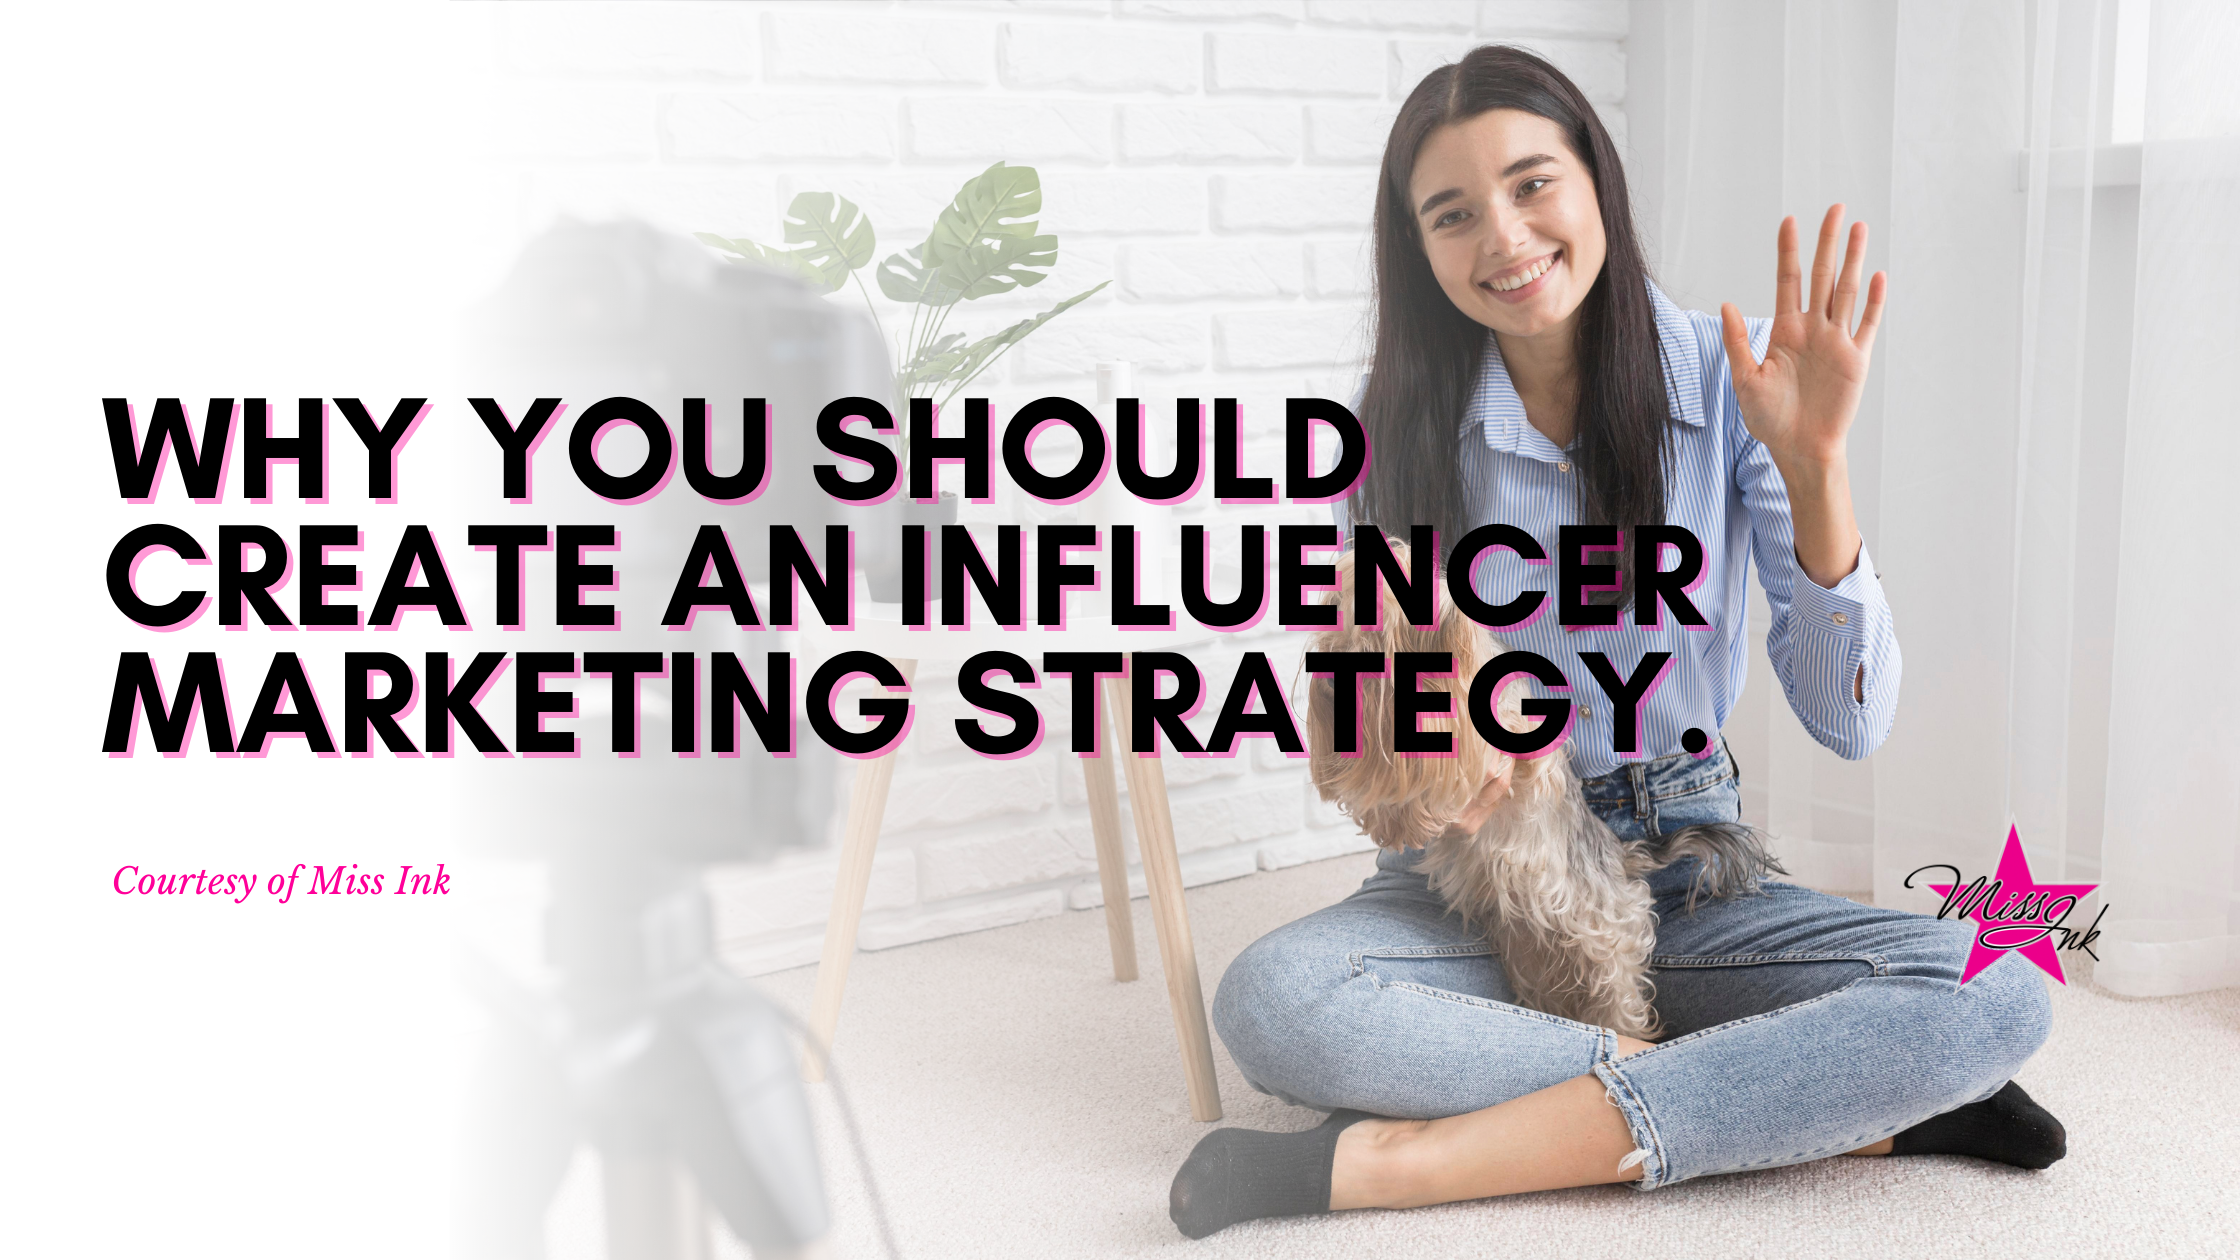 Why You Should Create An Influencer Marketing Strategy.